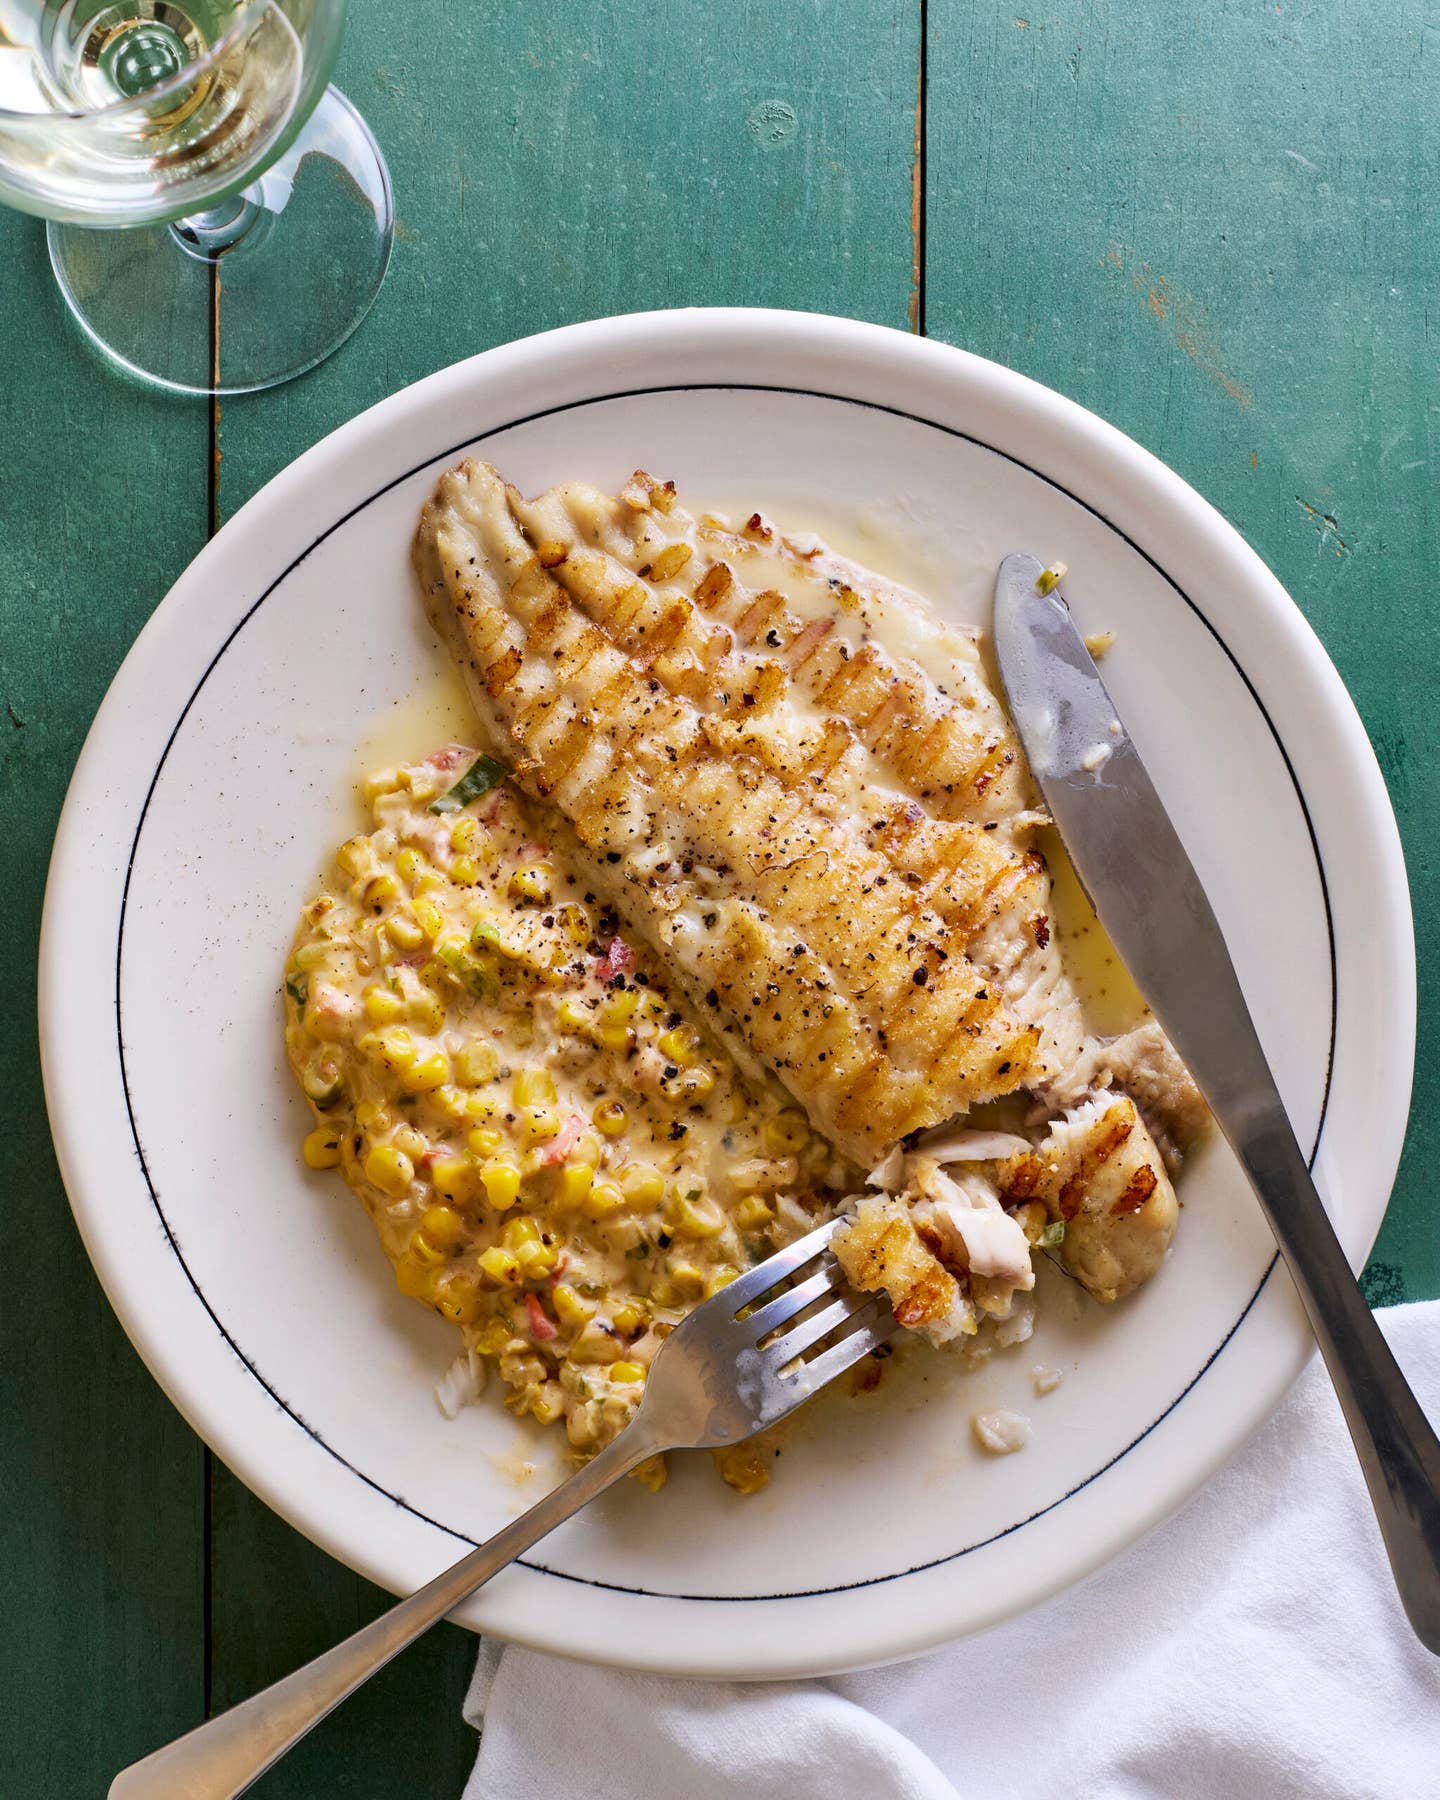 Grilled Catfish with Beurre Blanc and Corn Maque Choux